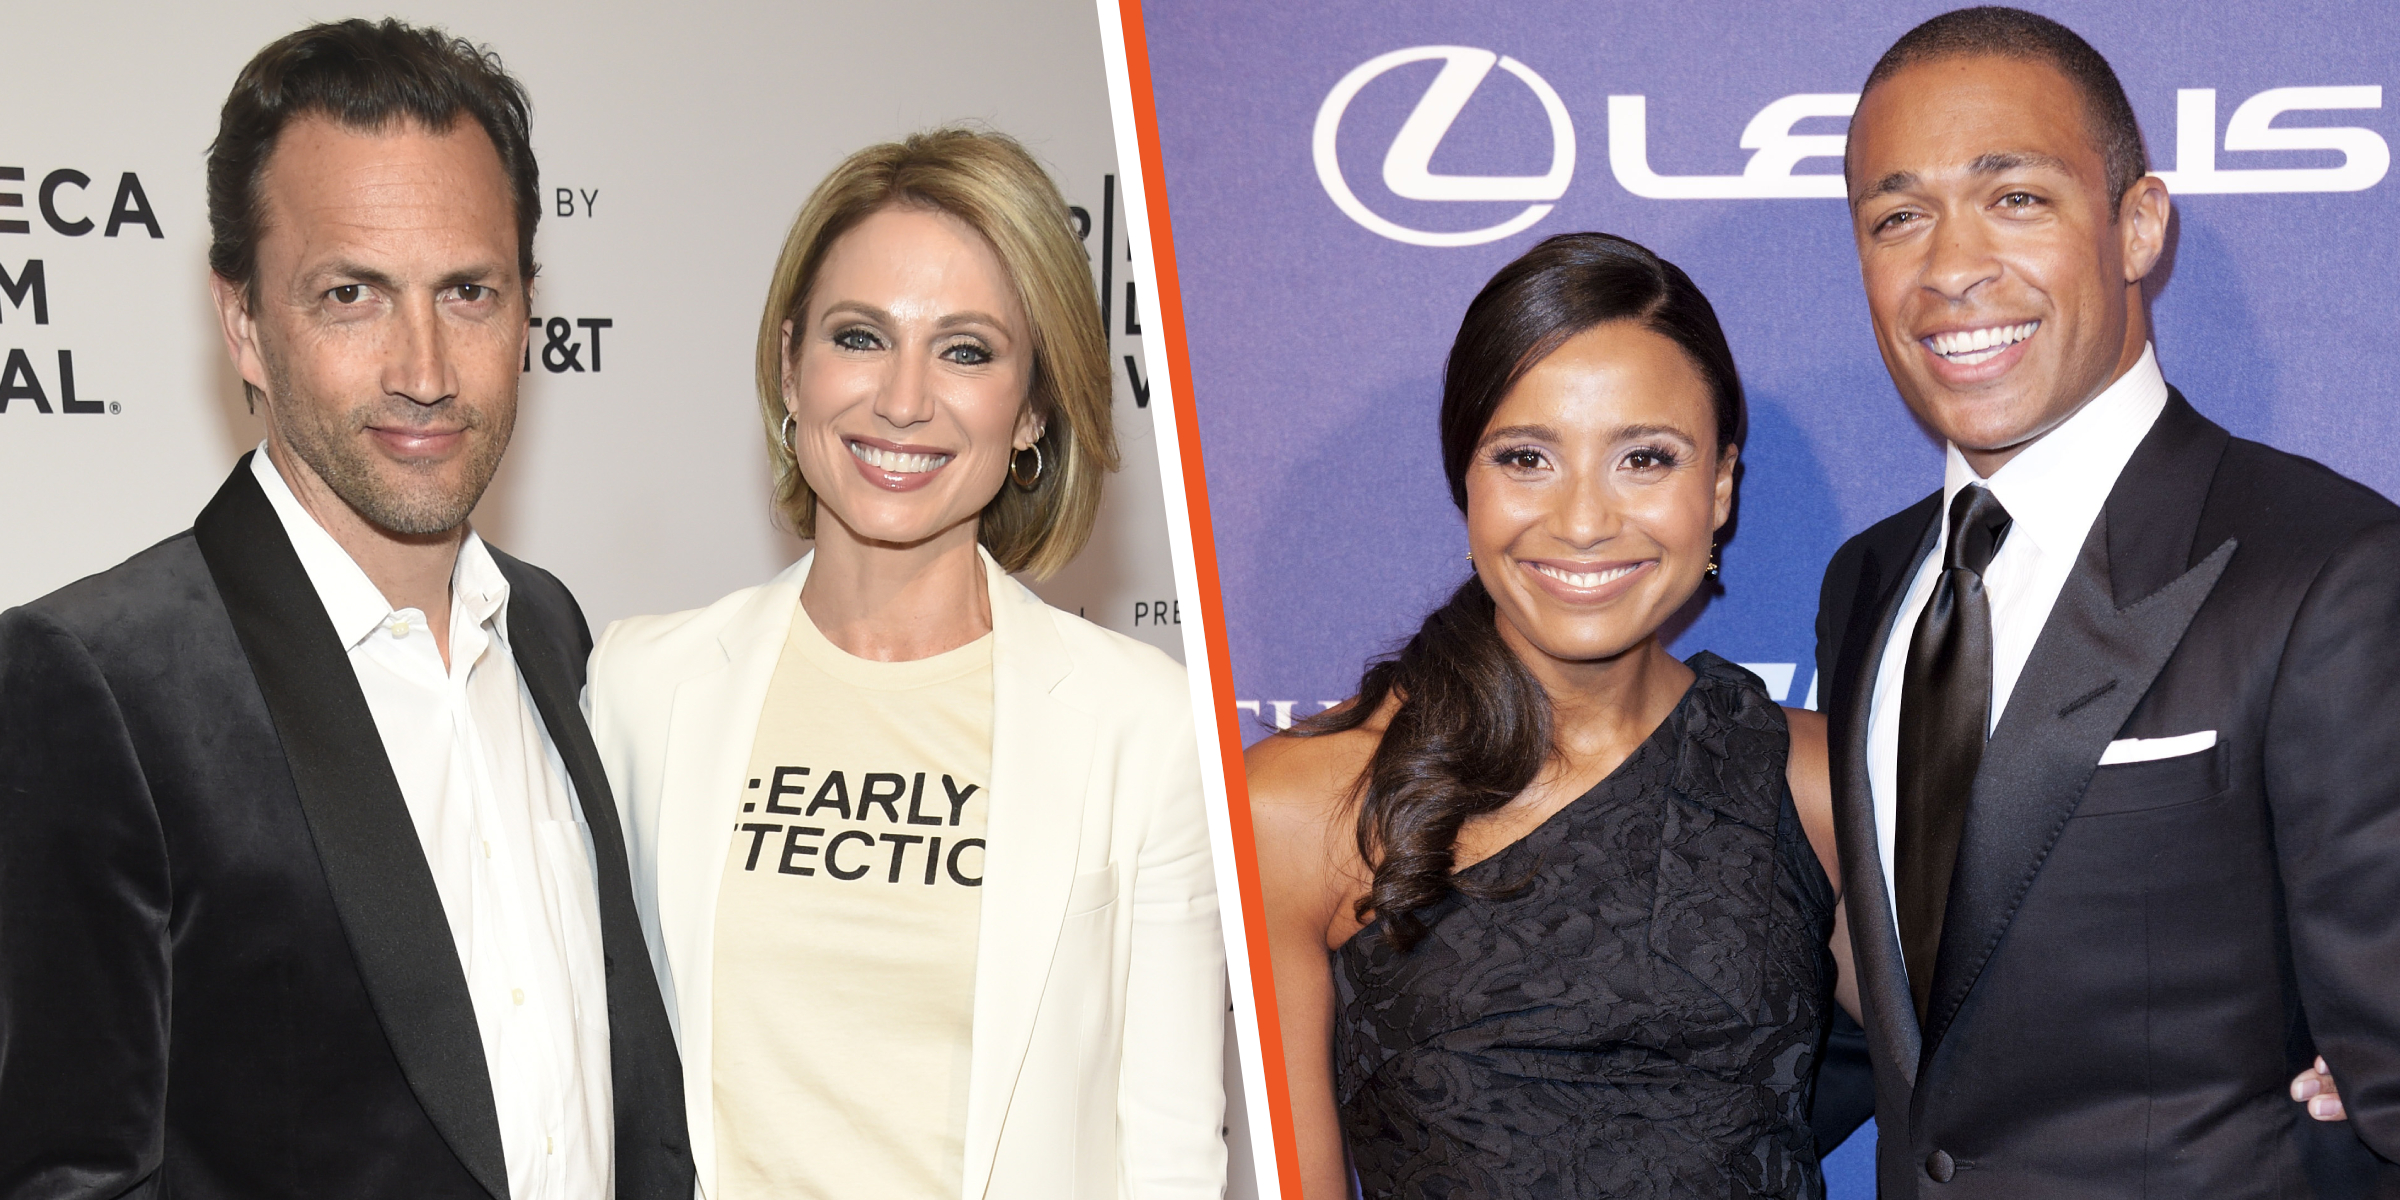 Andrew Shue and Amy Robach (L), Marilee Fiebig and TJ Holmes (R) | Source: Getty Images